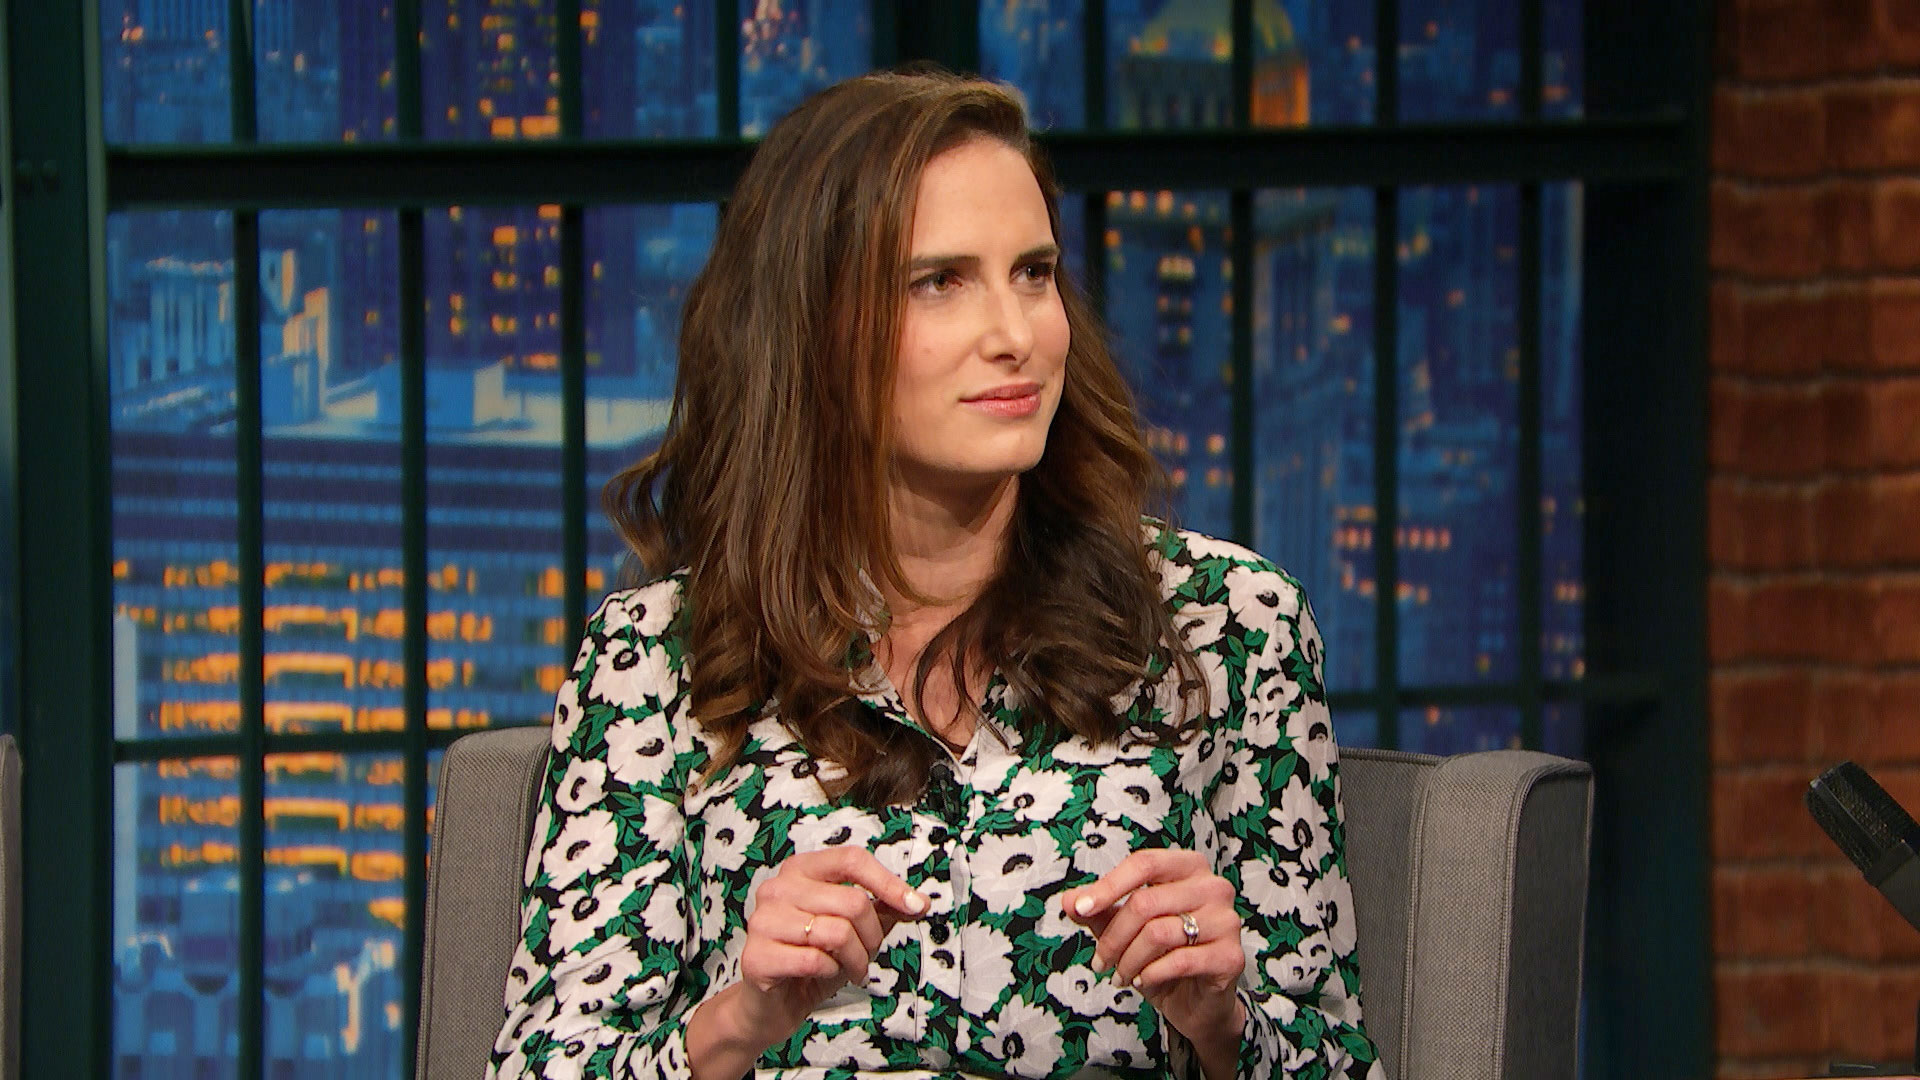 Watch Late Night with Seth Meyers Interview: Comedian Jessi Klein on